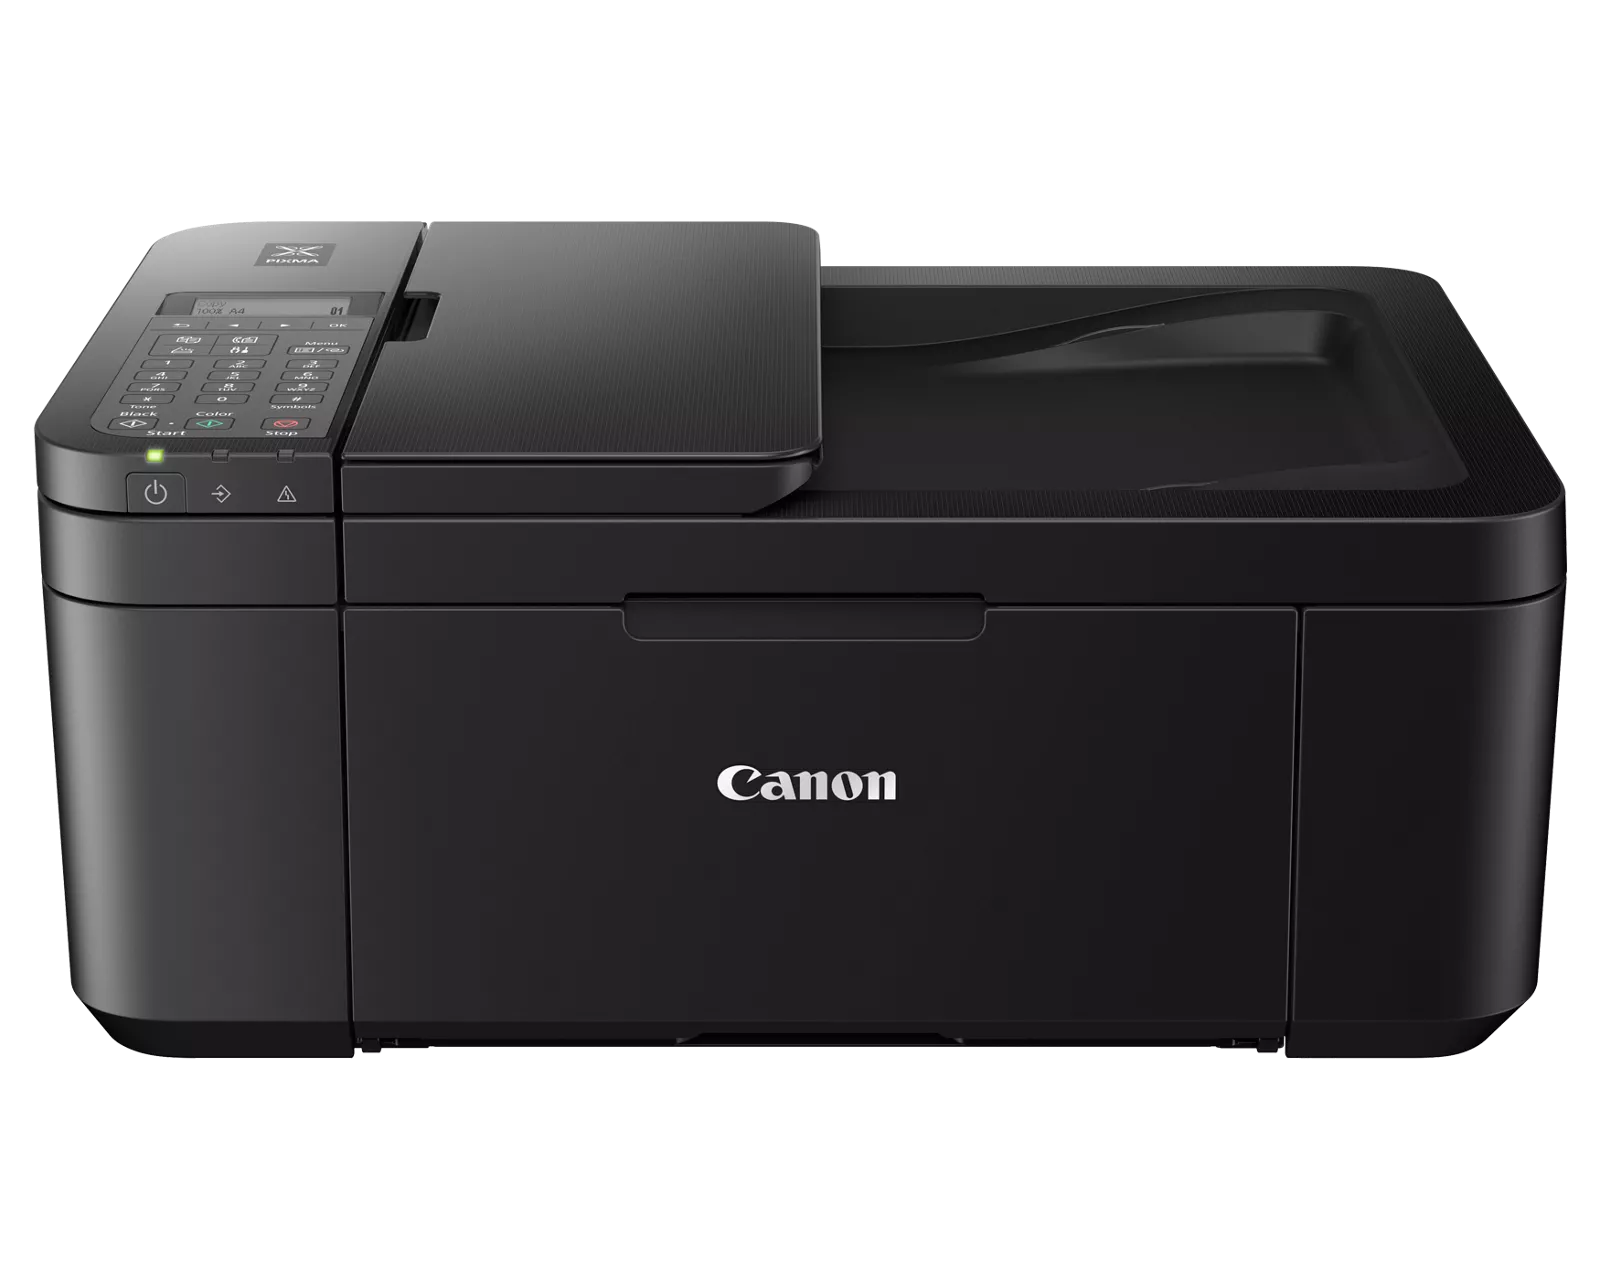 Quick And Easy Steps to Connect a Canon Printer to WiFi